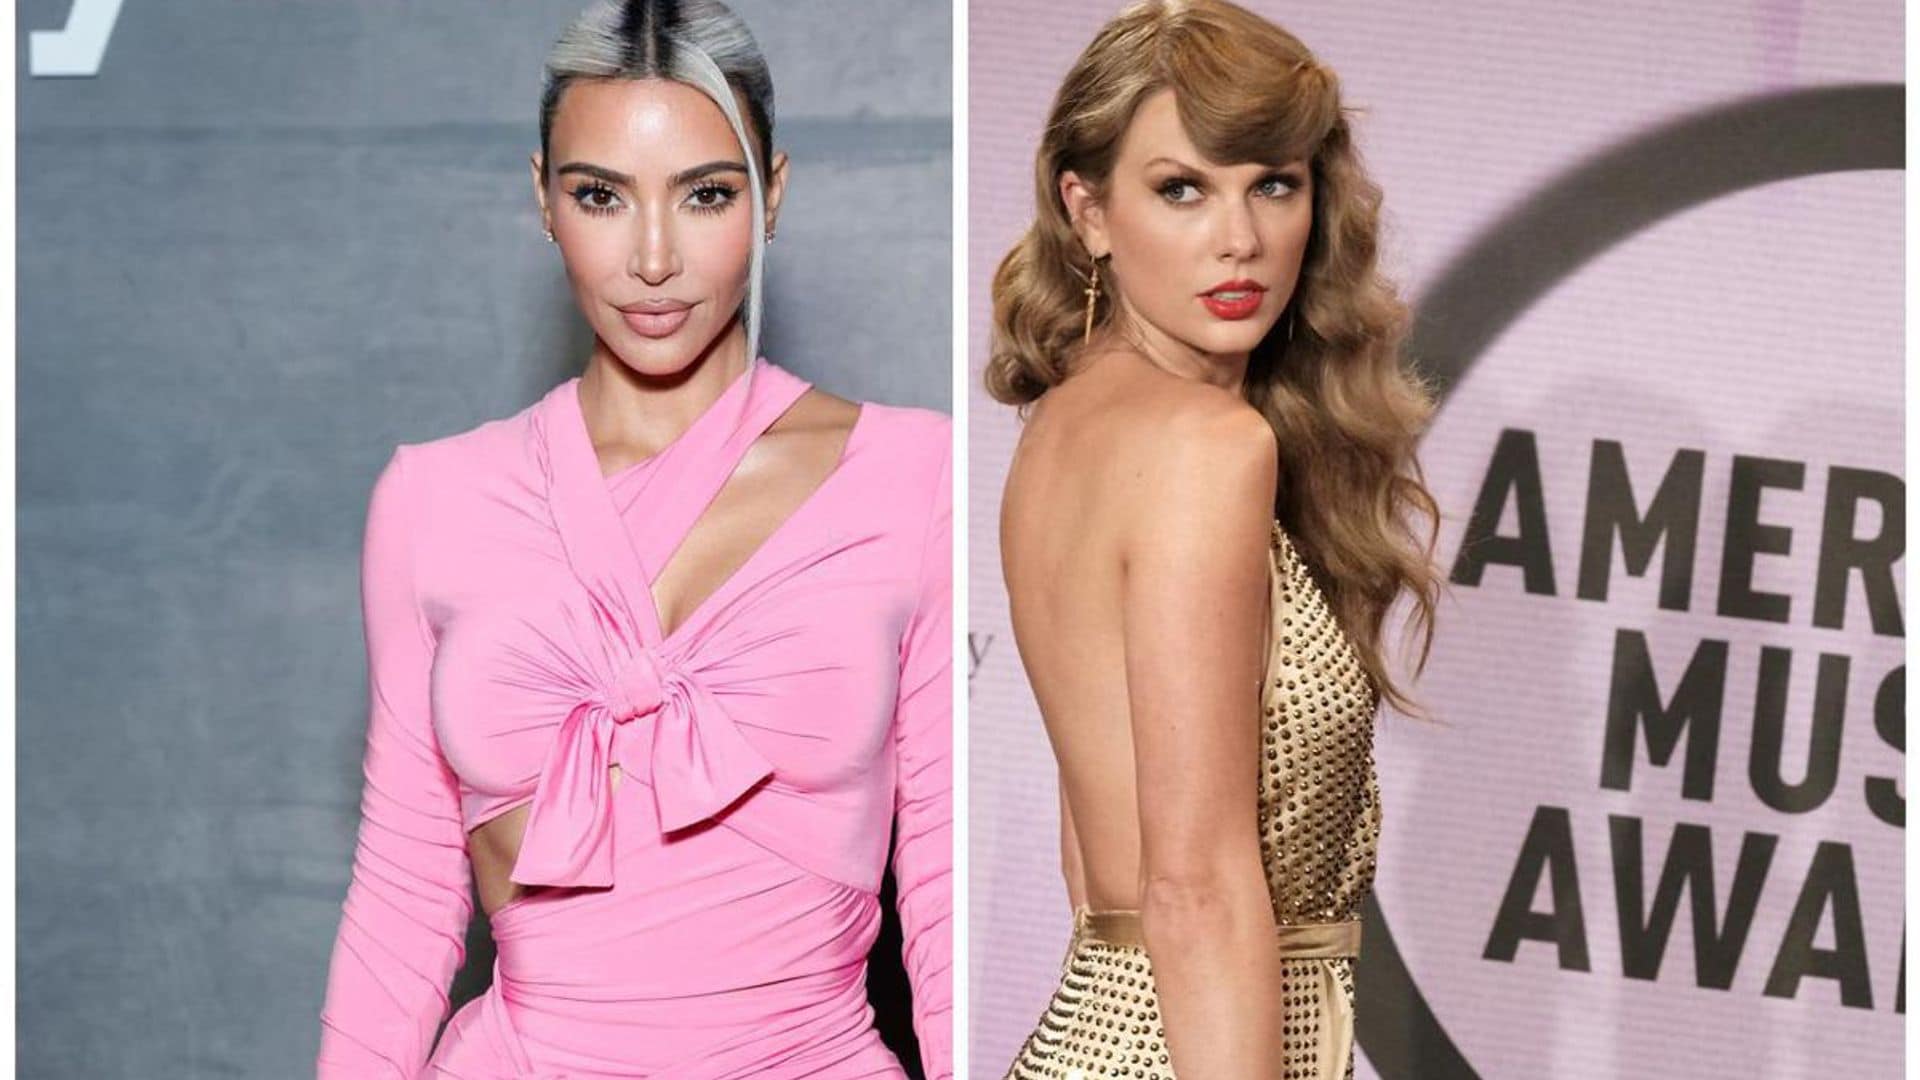 Kim Kardashian and North West dance to Taylor Swift’s song ‘Shake It Off’ despite longtime feud